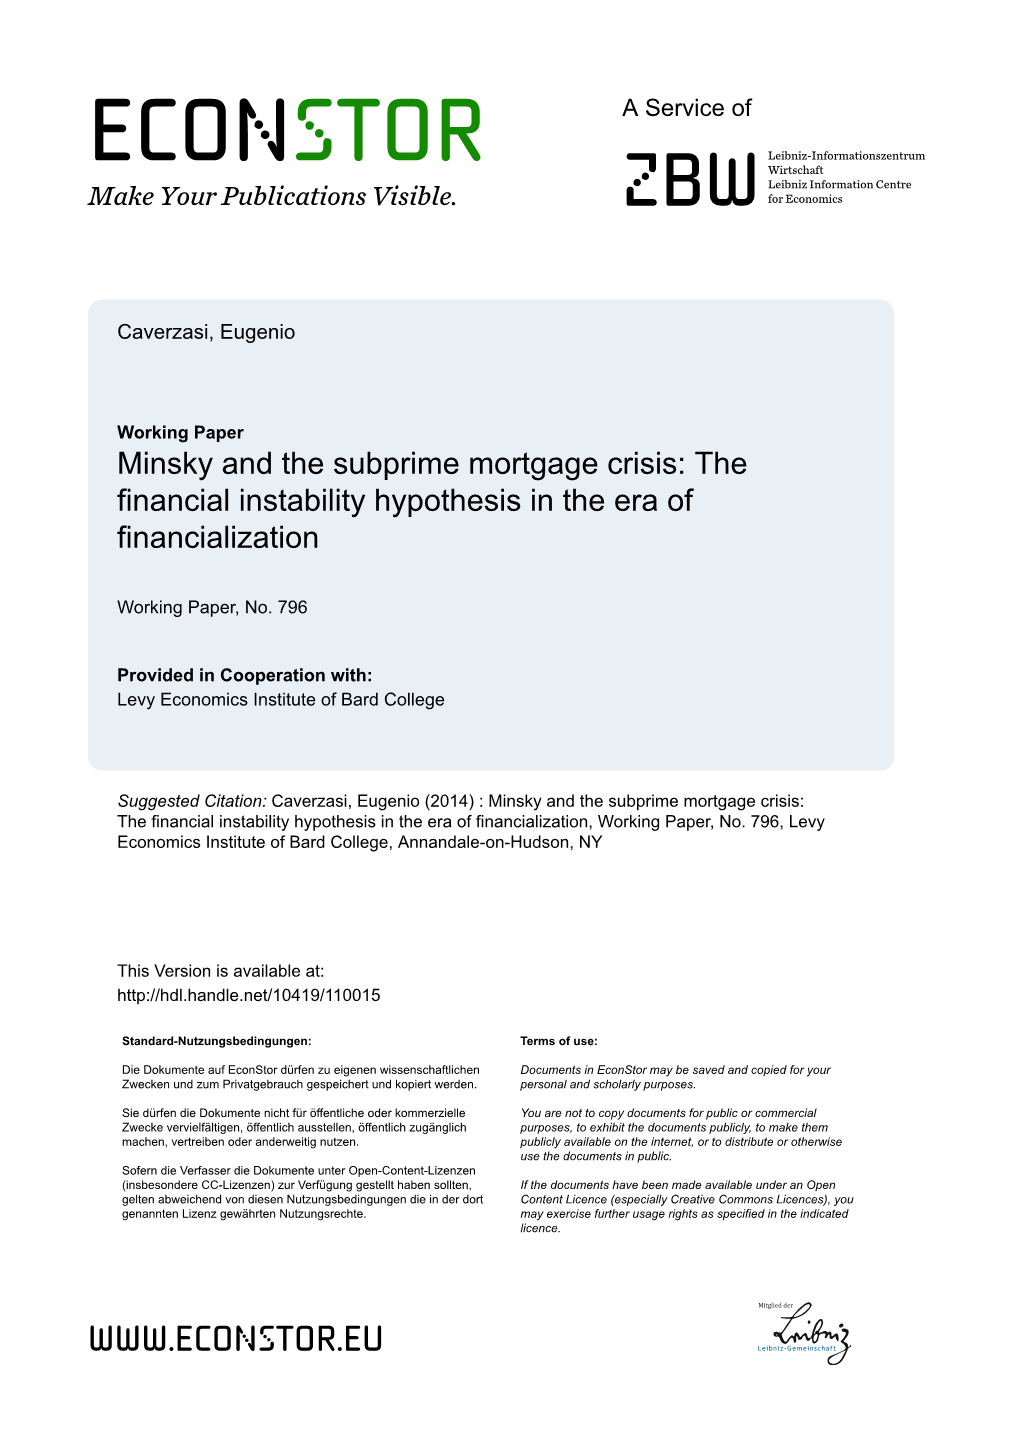 Minsky and the Subprime Mortgage Crisis: the Financial Instability Hypothesis in the Era of Financialization